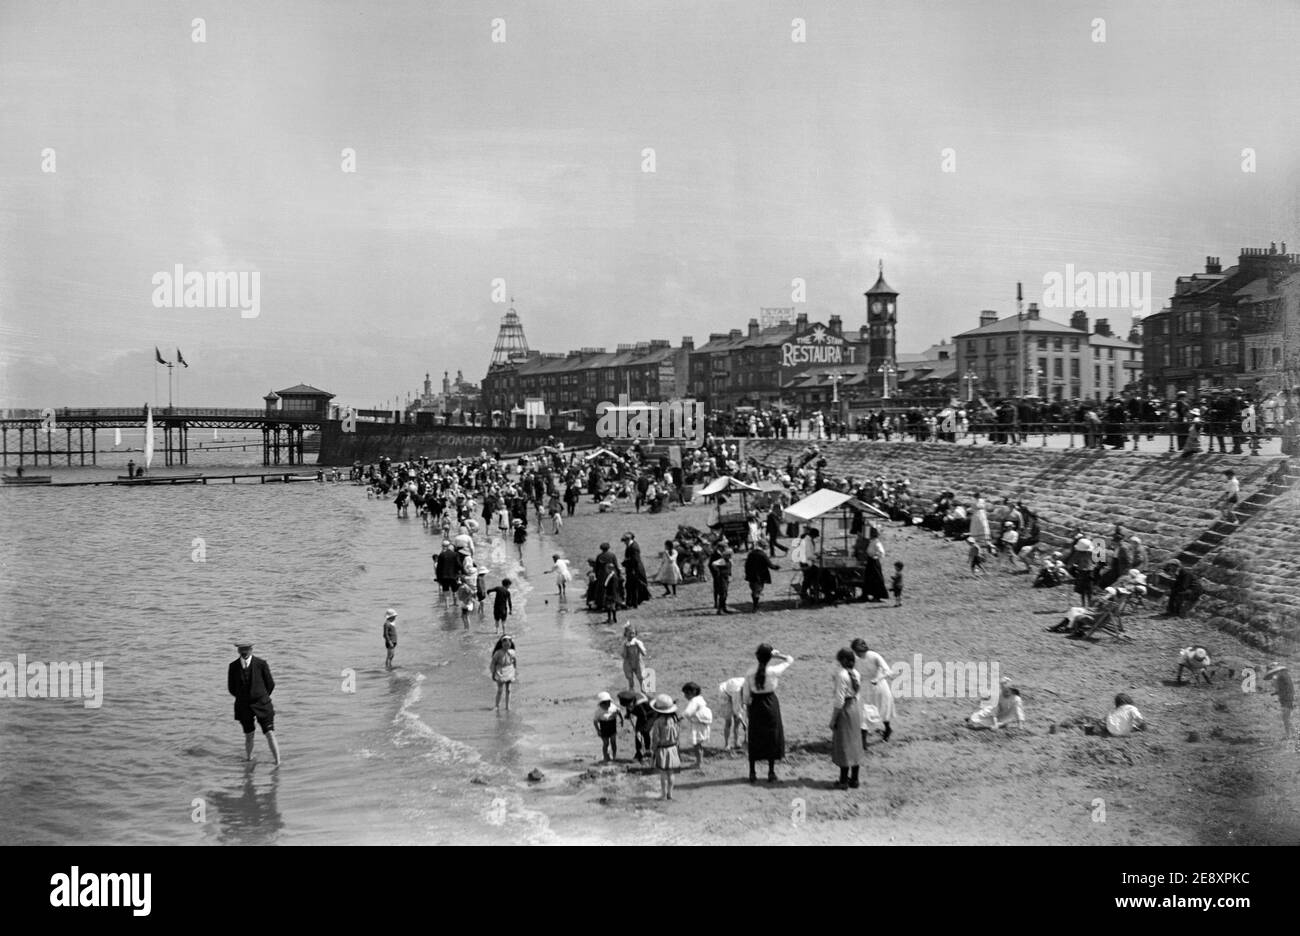 A late Victorian black and white photograph showing people enjoying their holidays at a beach in England. Stock Photo